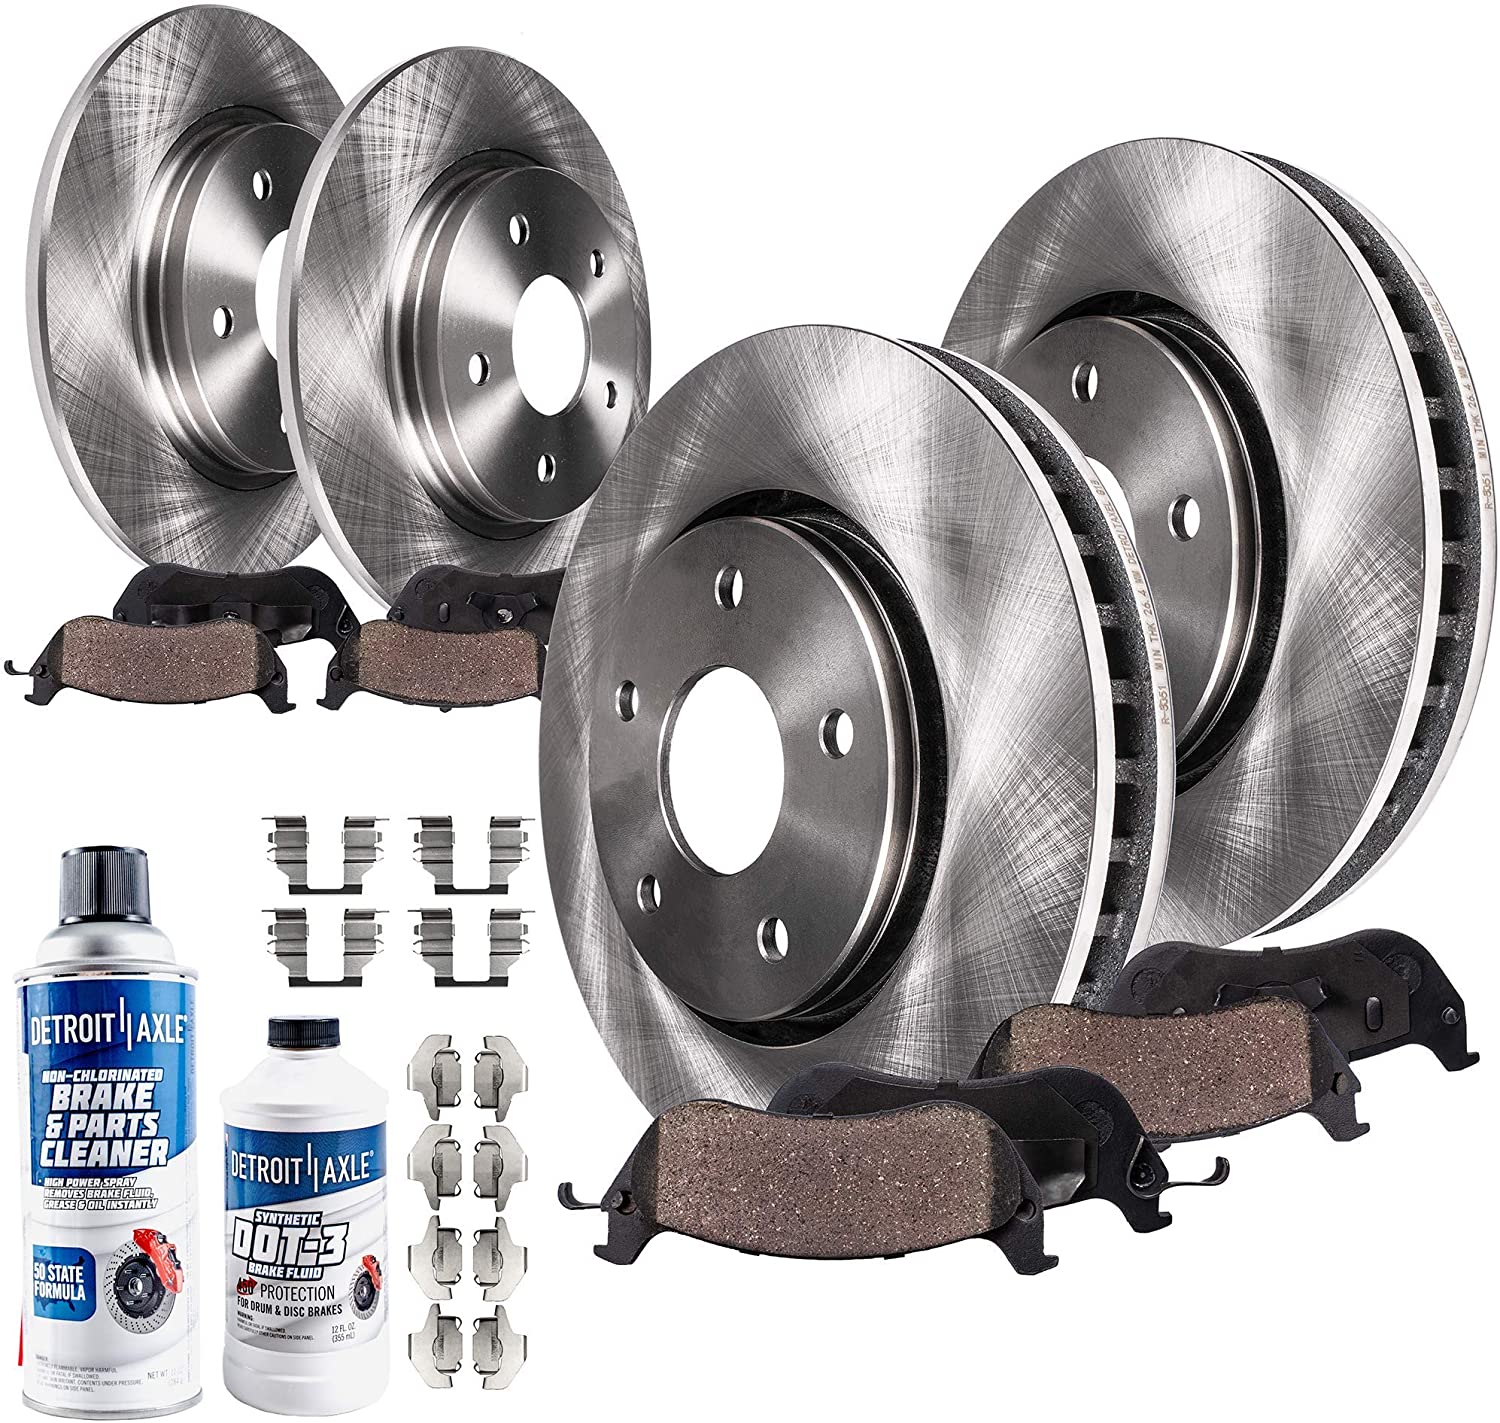 Detroit Axle - All (4) Front and Rear Disc Brake Kit Rotors w/Ceramic Pads w/Hardware & Brake Kit Cleaner & Fluid for 2002 2003 2004 2005 2006 2007 Buick Rendezvous FWD - [2001-2005 Pontiac Aztek FWD]